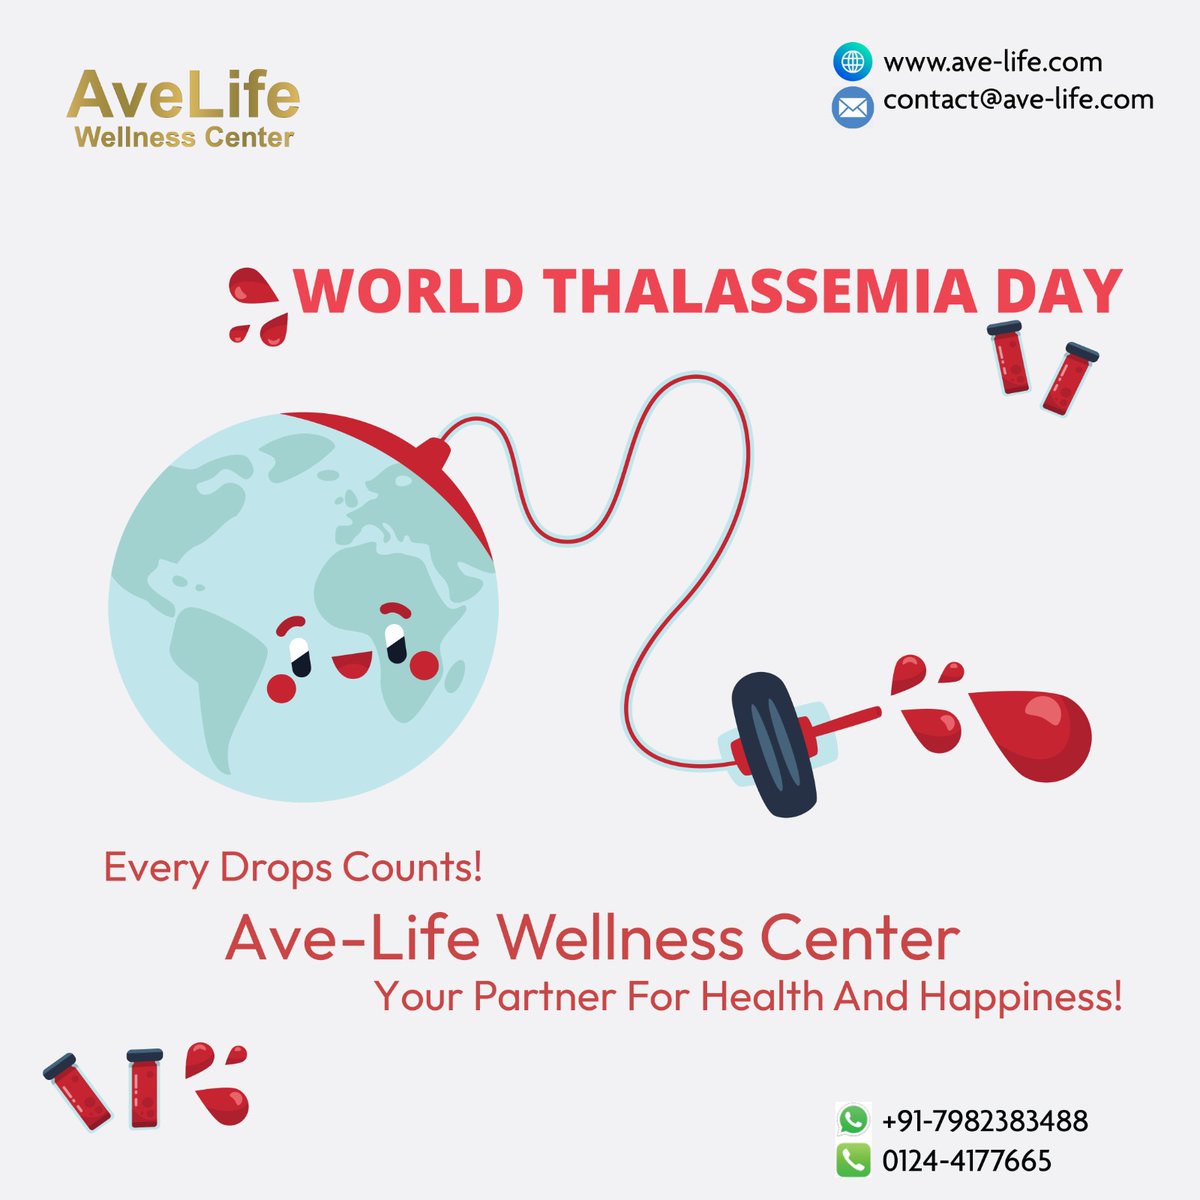 'Empowering hearts and spreading awareness on World Thalassemia Day. Let's unite for a brighter tomorrow! ❤️ #AvelifeWellness #FightThalassemia'
 #RedCrossDay'
#avelifewellness
#cancerjourney
#PersonalizedDietPlan
#cancernutrition
#healingwithfood
#wellnessguidance
#Everyone